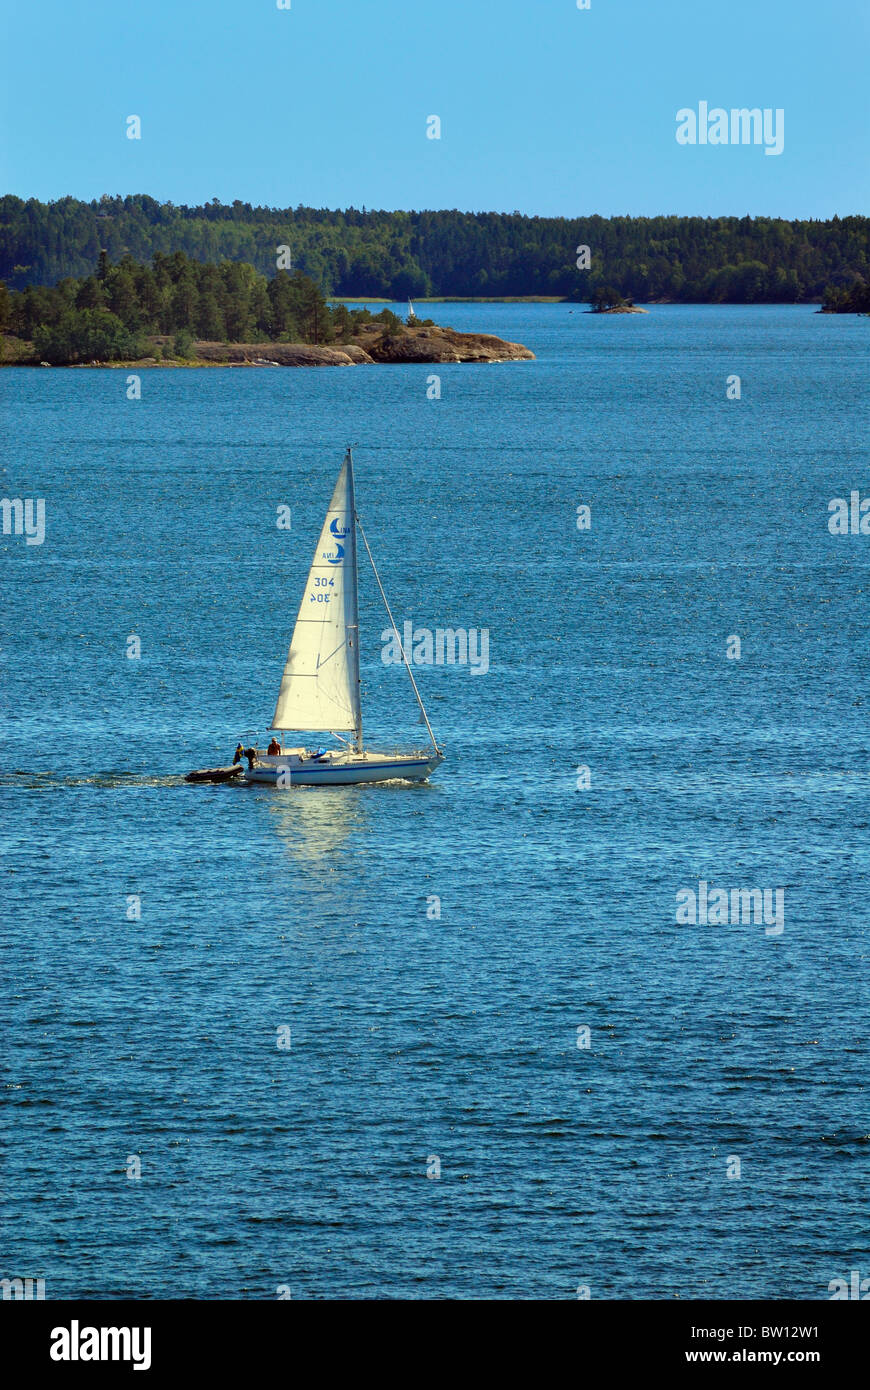 Sailboat at sea outside of Stockholm, Sweden, Europe Stock Photo